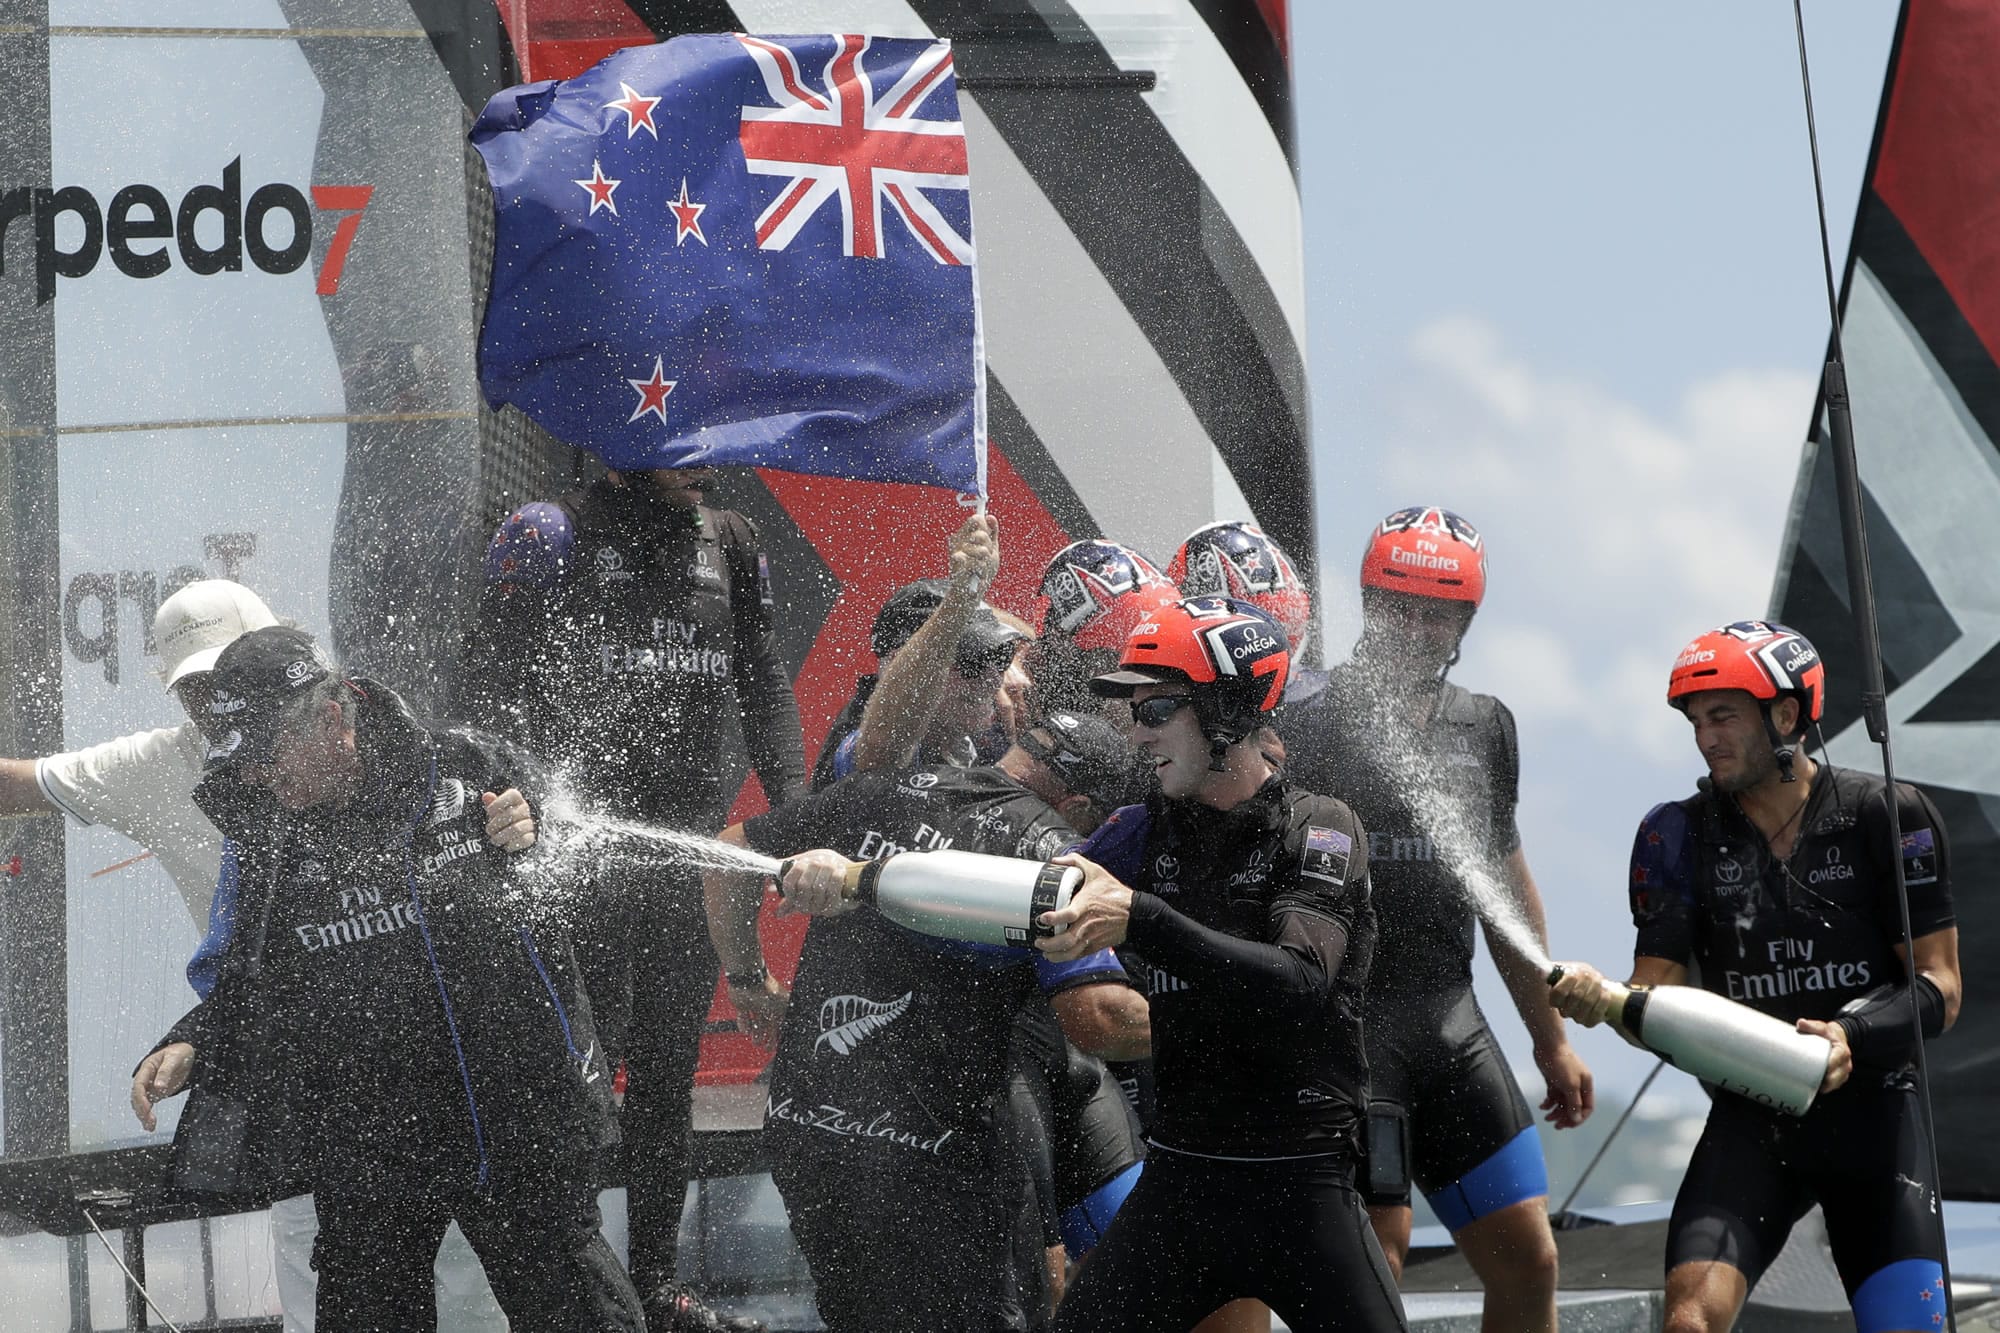 The crew of Emirates Team New Zealand spray champagne as they celebrate after defeating Oracle Team USA to win the America's Cup sailing competition Monday, June 26, 2017, in Hamilton, Bermuda.